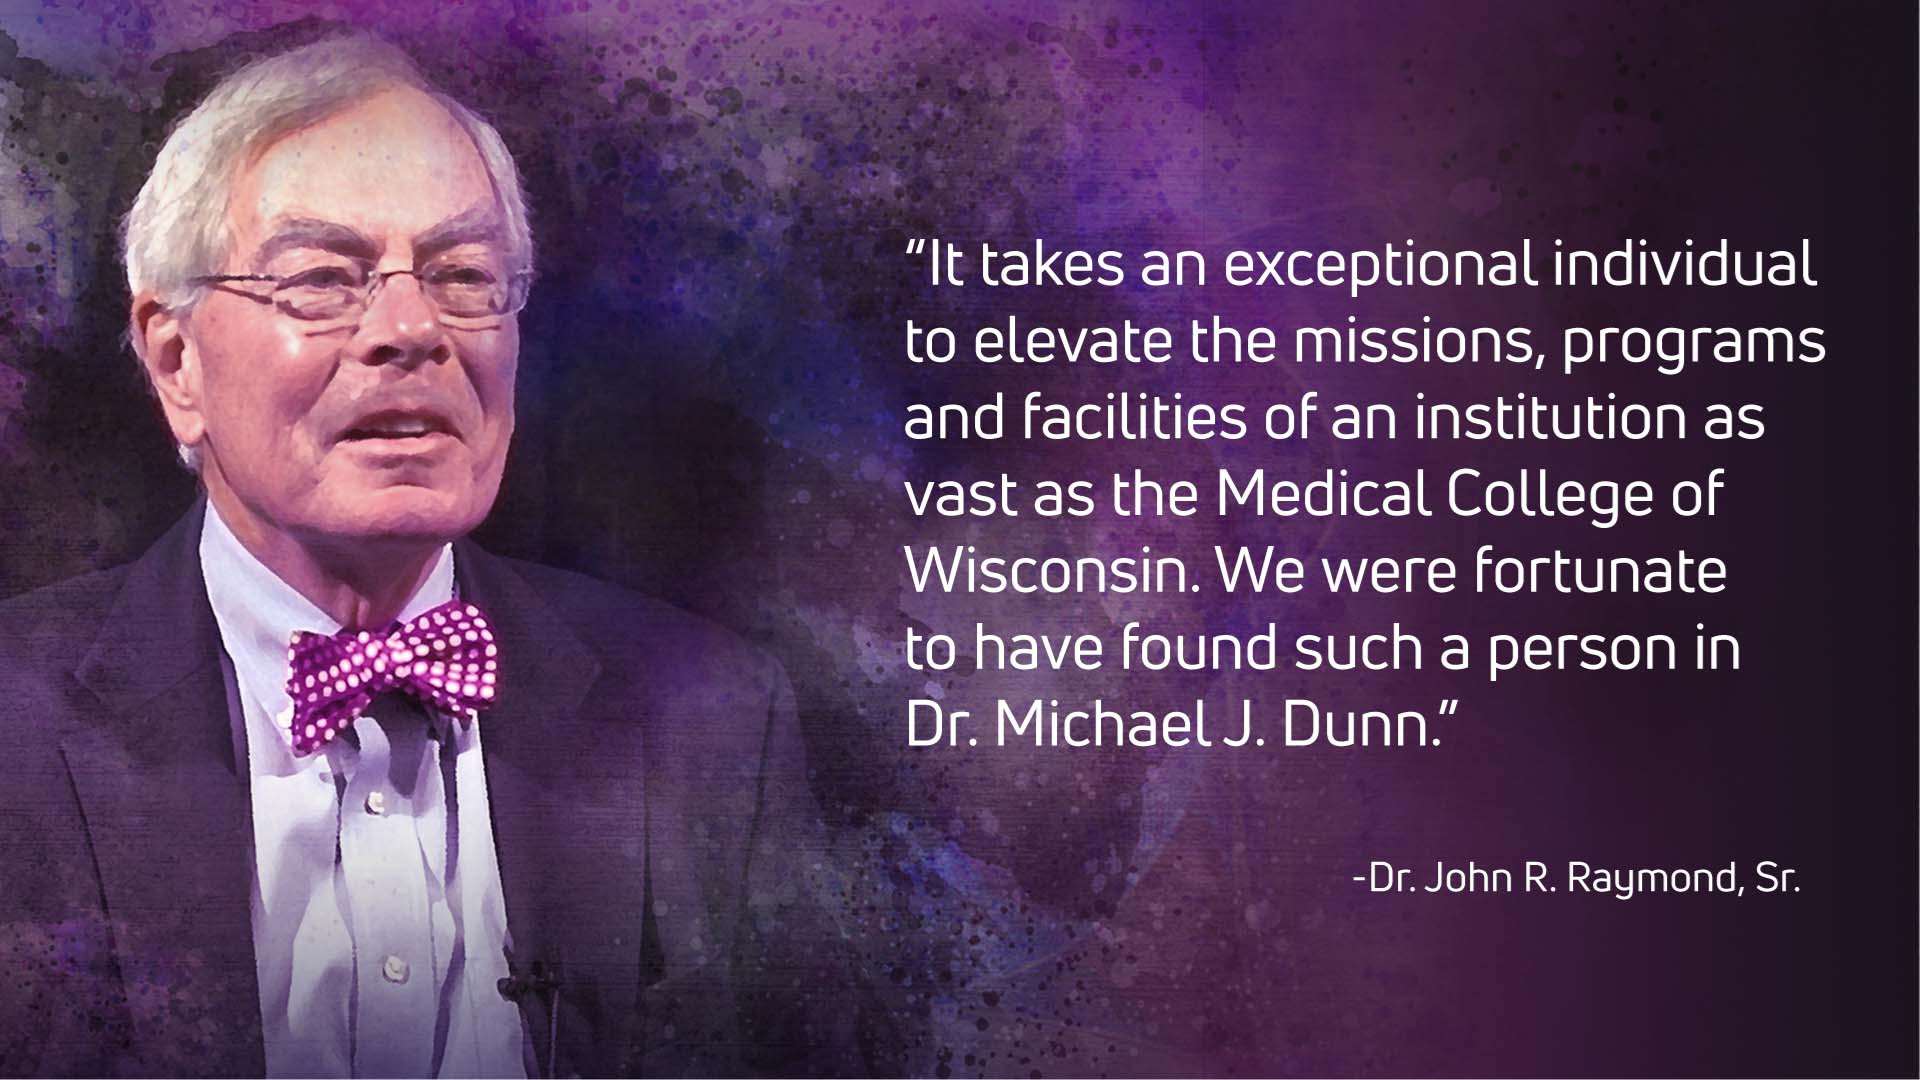 The life, legacy and leadership of Michael J. Dunn, MD honored in virtual celebration